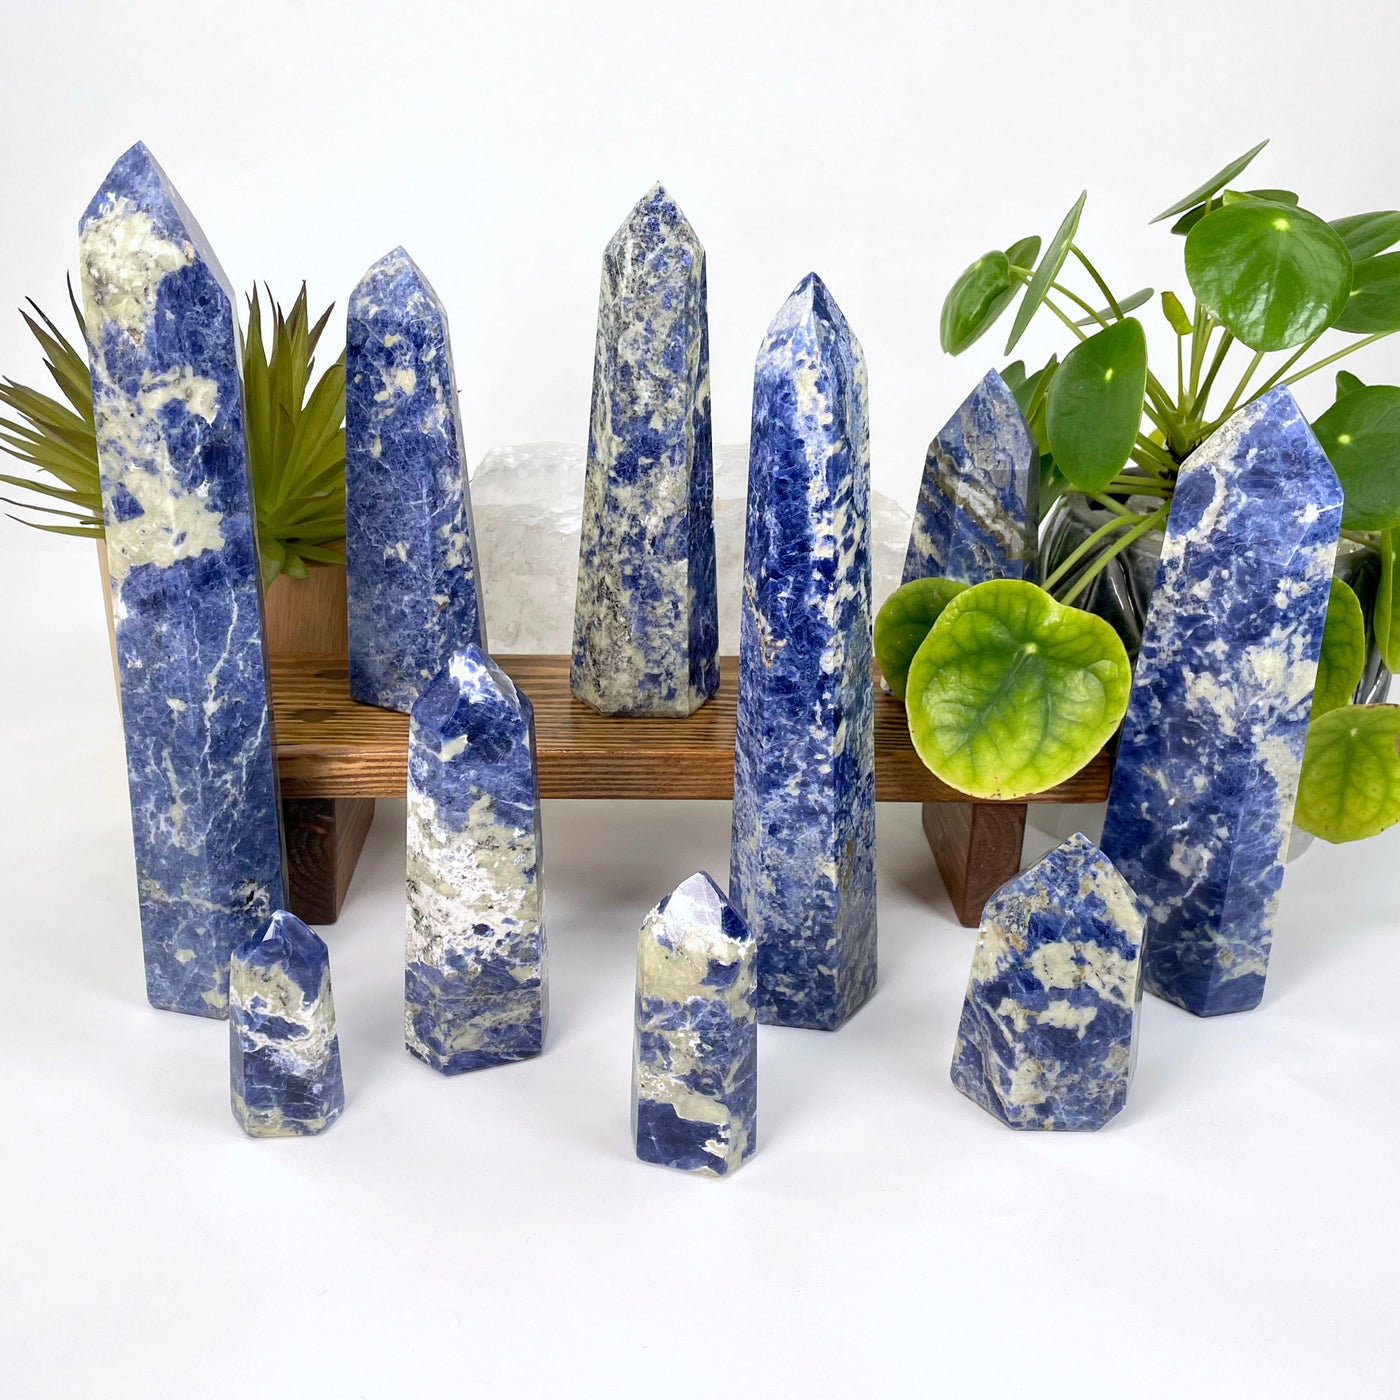 many different sodalite polished point weights on display